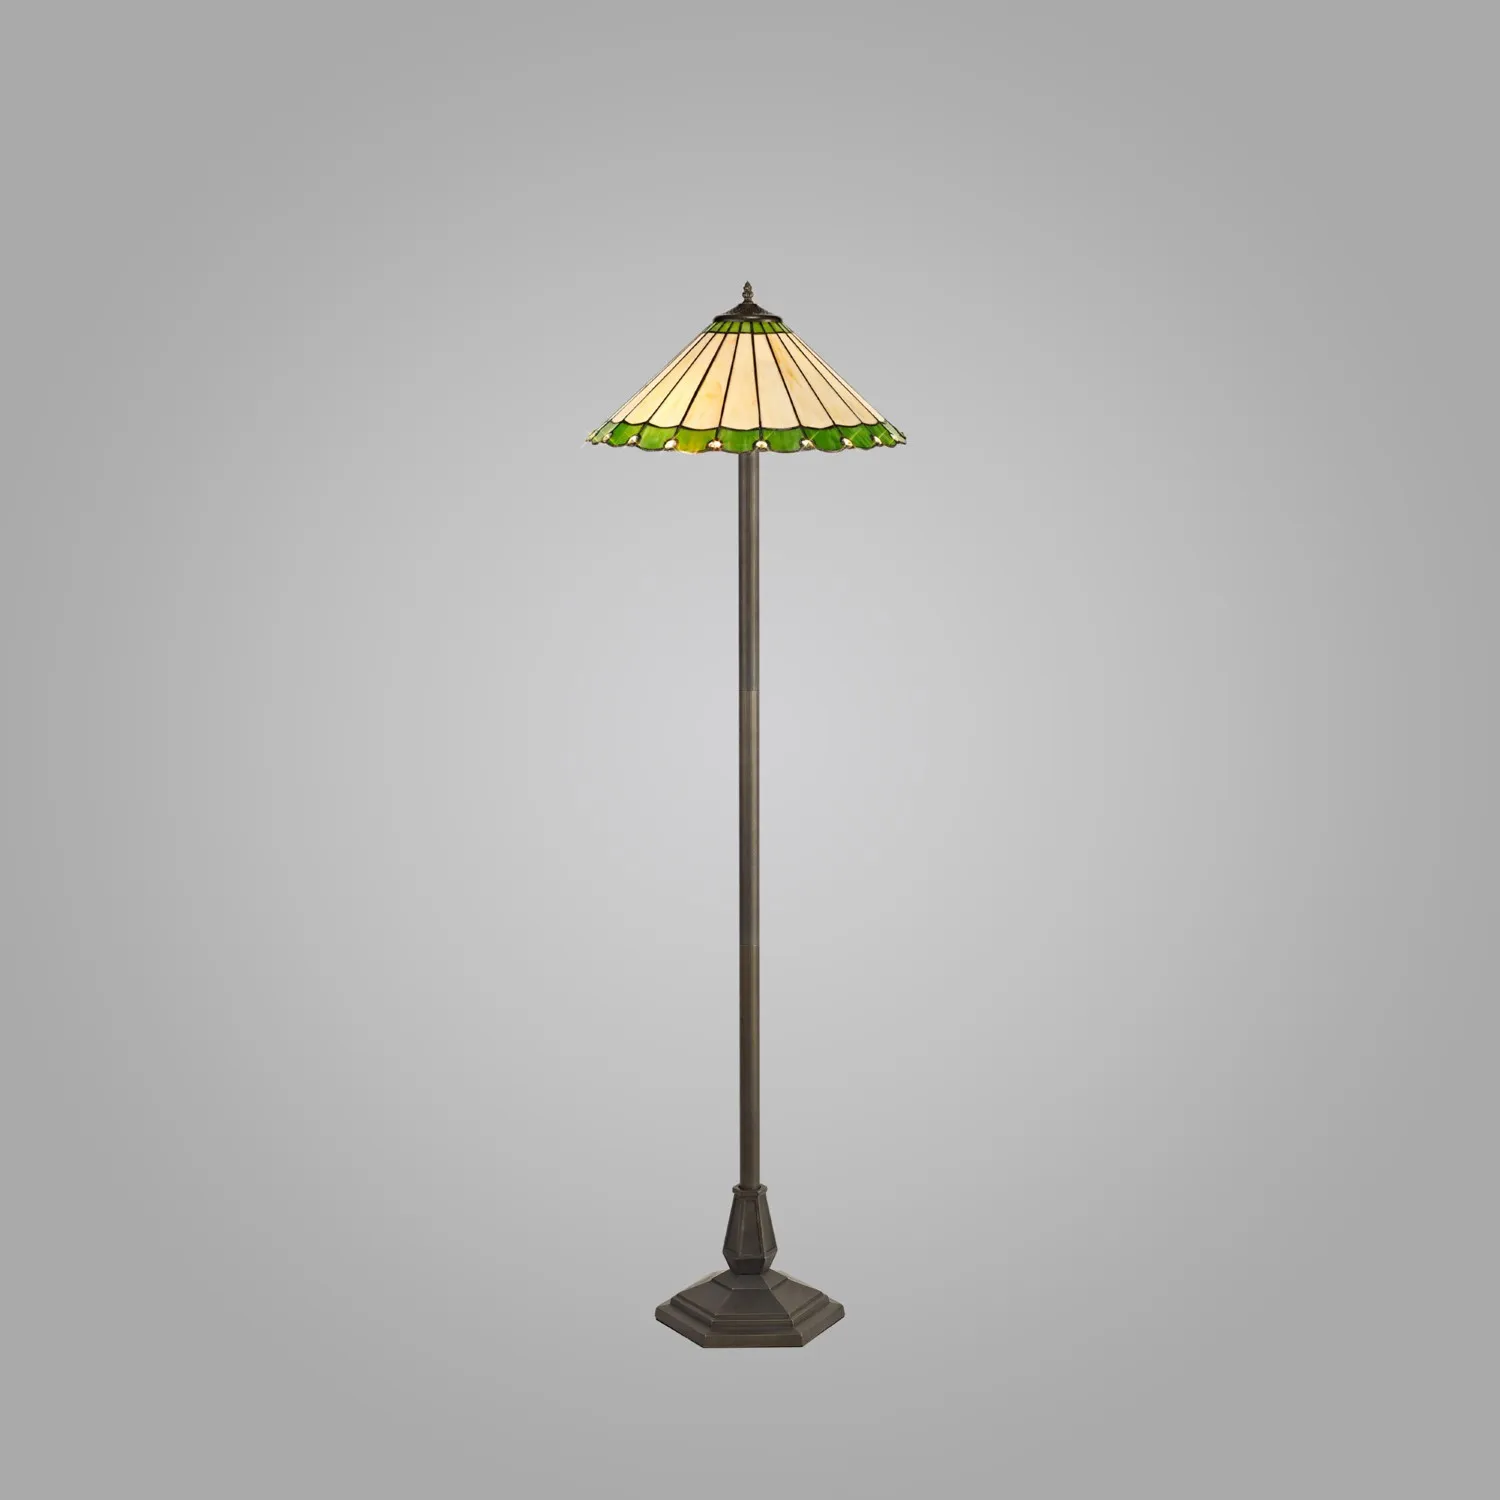 Ware 2 Light Octagonal Floor Lamp E27 With 40cm Tiffany Shade, Green Cream Crystal Aged Antique Brass